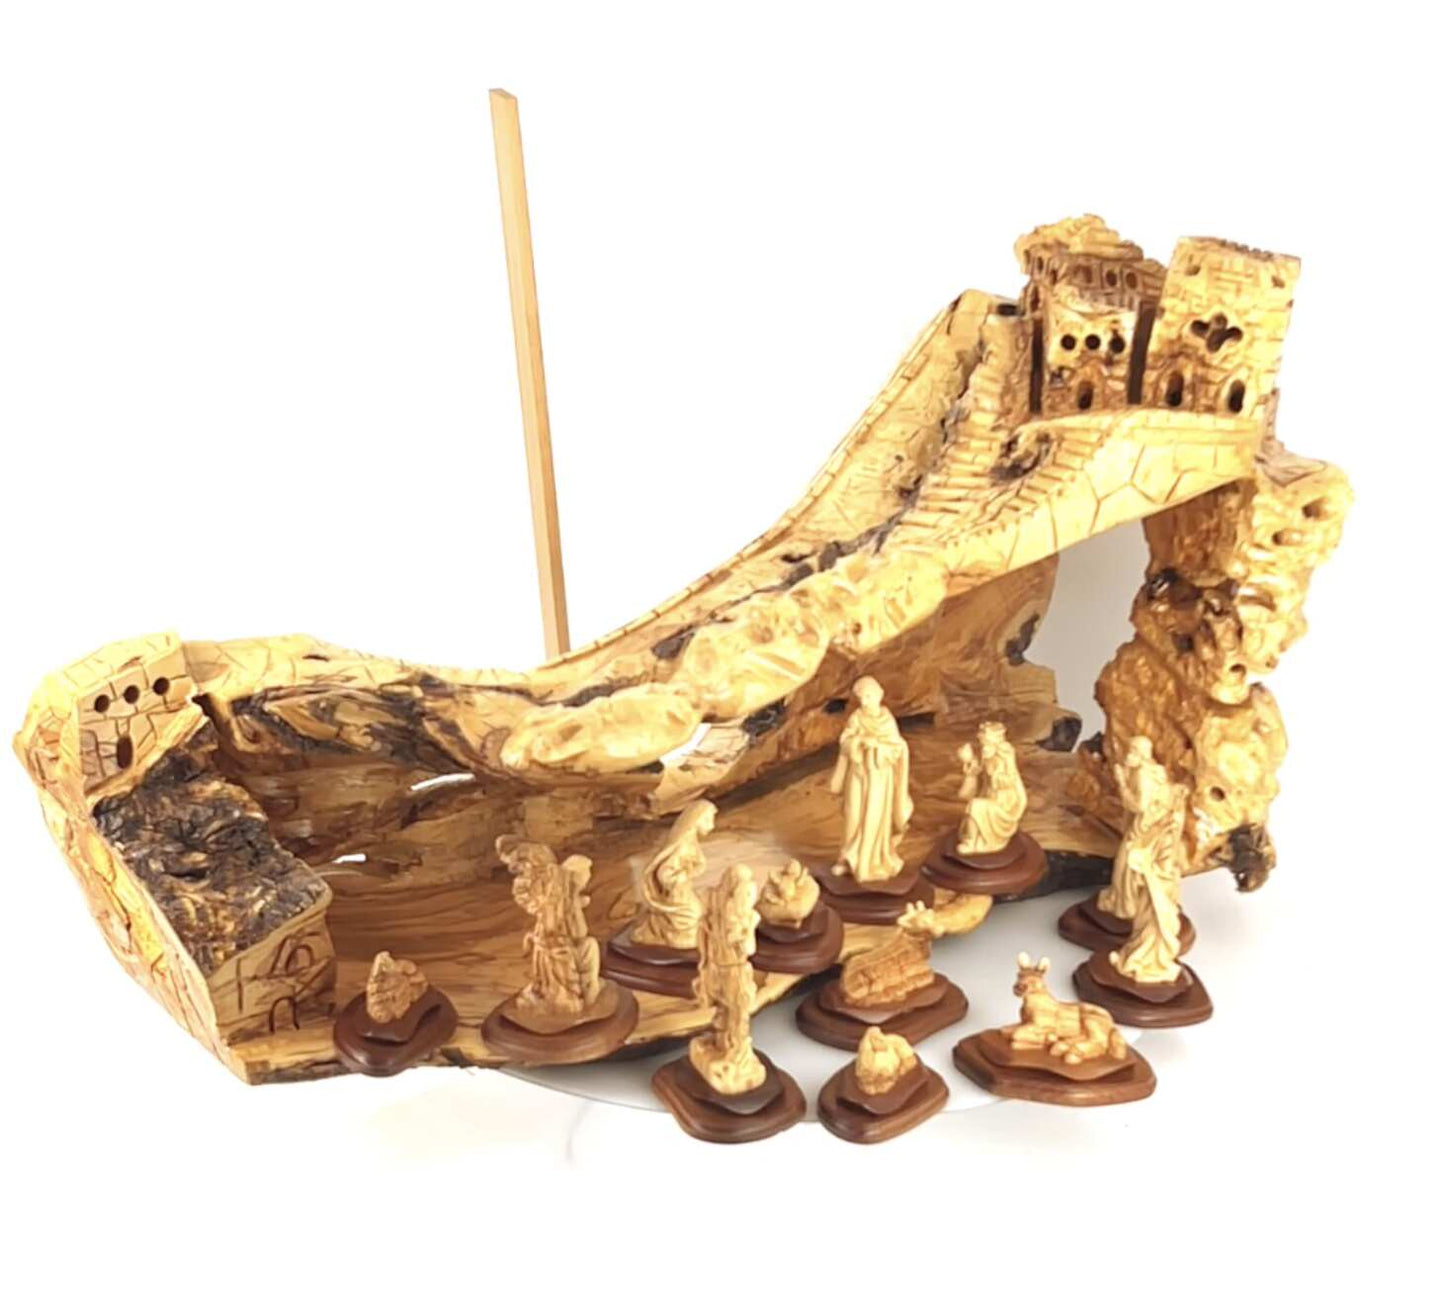 Unique Natural Olive Wood Nativity Scene, with 'Masterpiece Figurines', from Olive Wood in Bethlehem